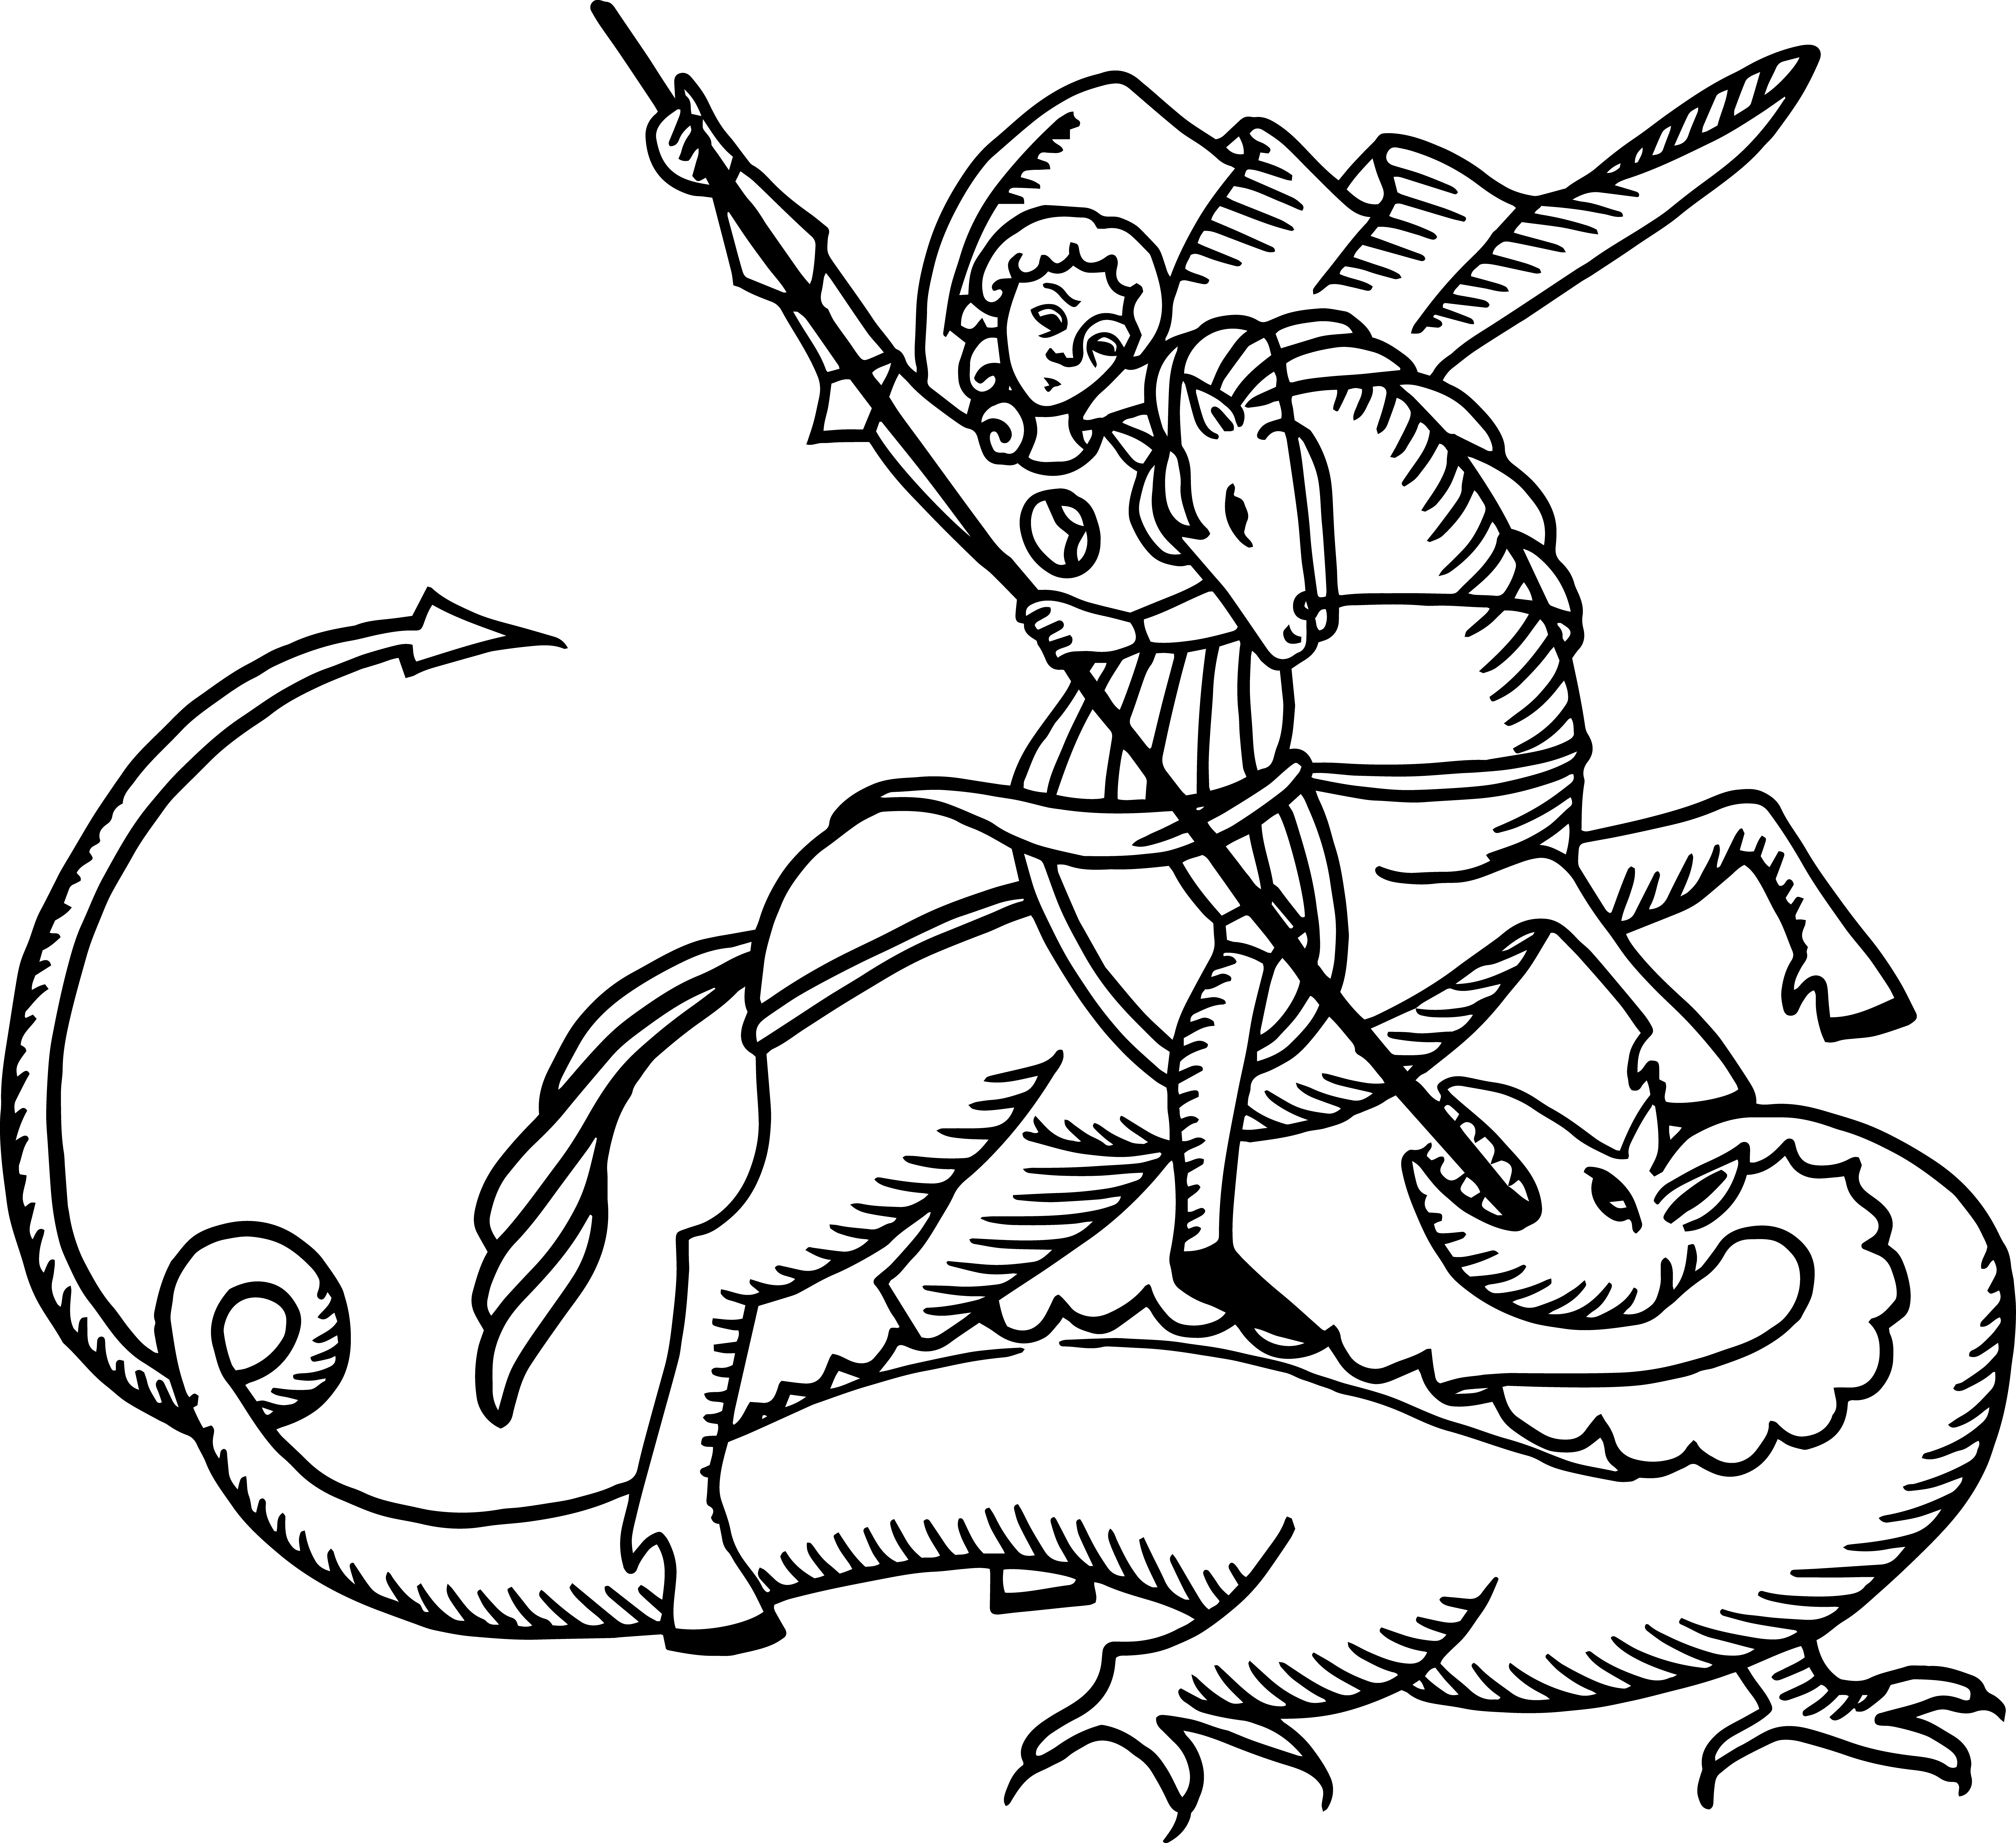 knight clipart peasant